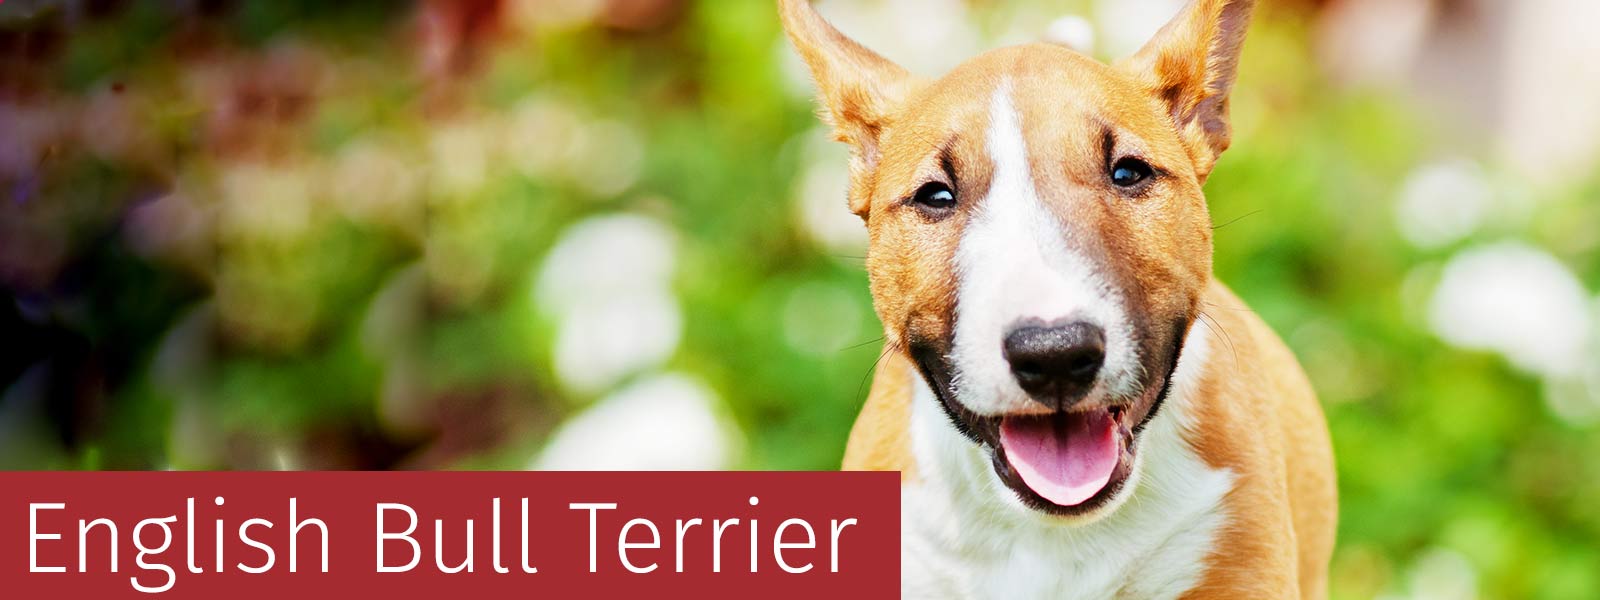 English Bull Terrier Gifts